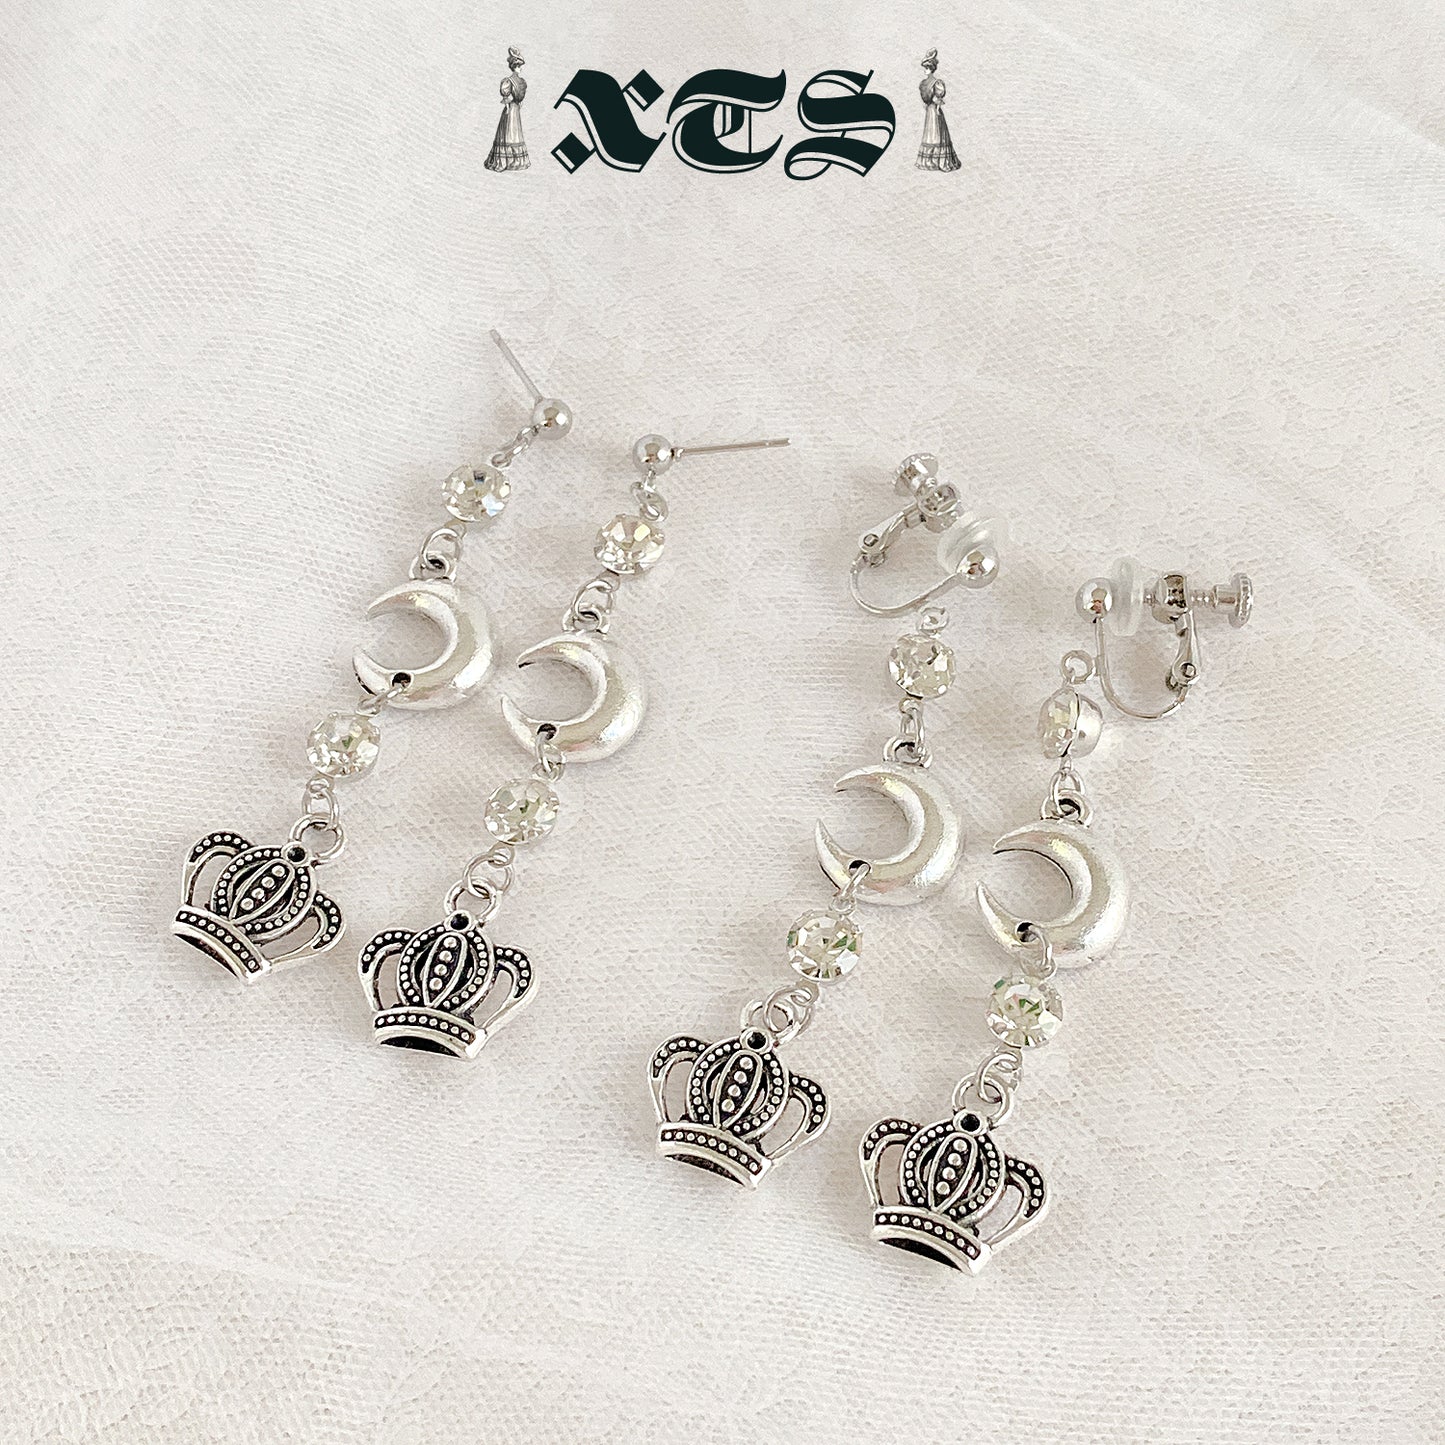 XTS Moon & Crown Pierce Earrings - YOUAREMYPOISON